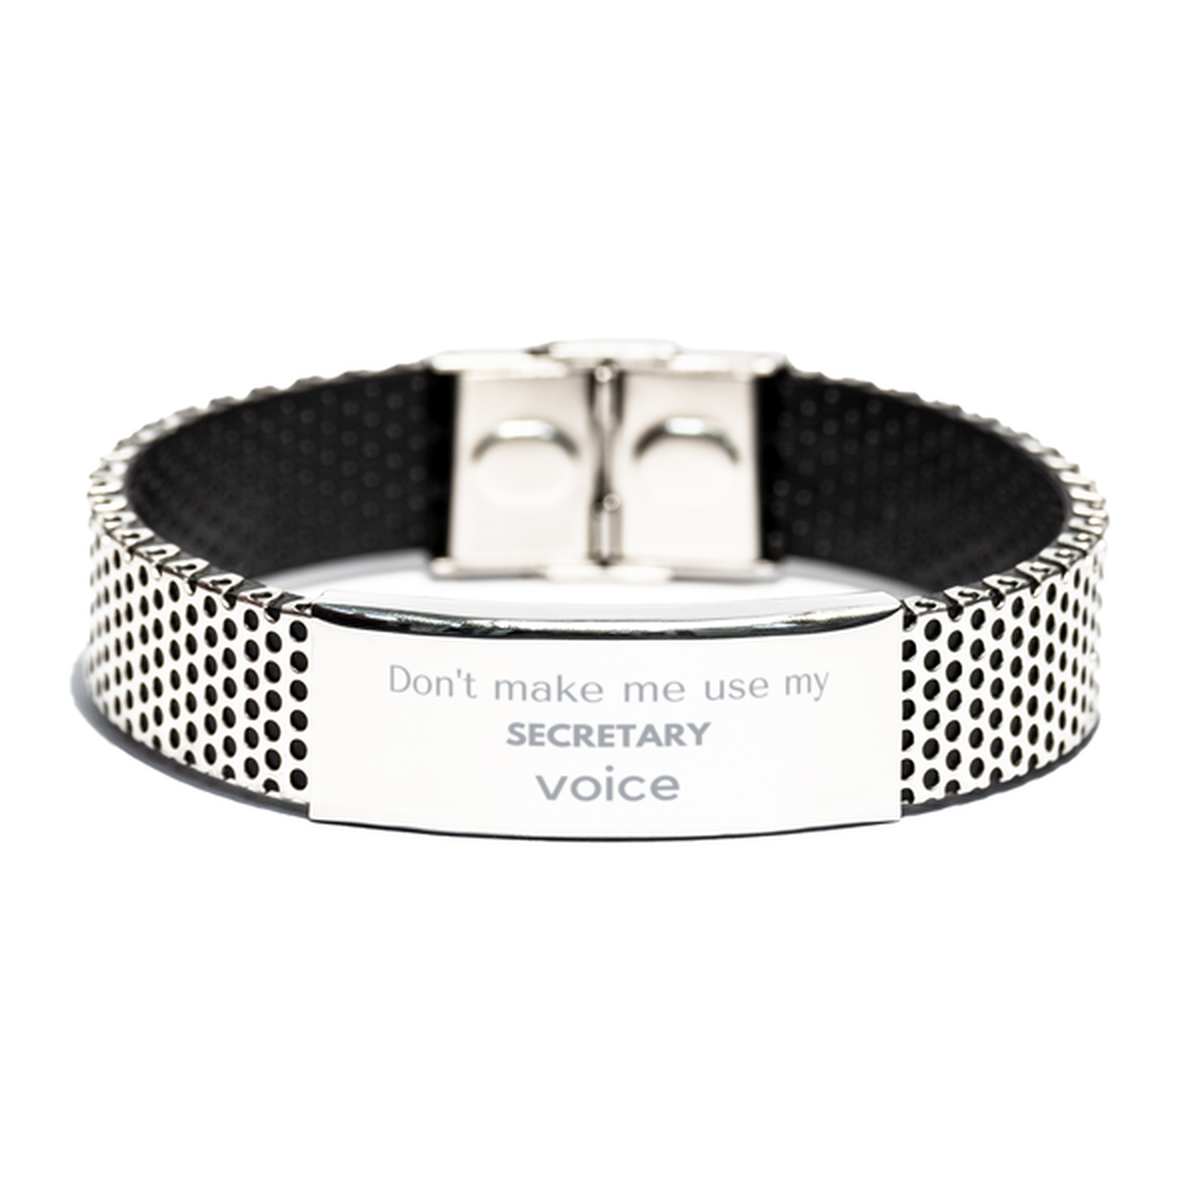 Don't make me use my Secretary voice, Sarcasm Secretary Gifts, Christmas Secretary Stainless Steel Bracelet Birthday Unique Gifts For Secretary Coworkers, Men, Women, Colleague, Friends